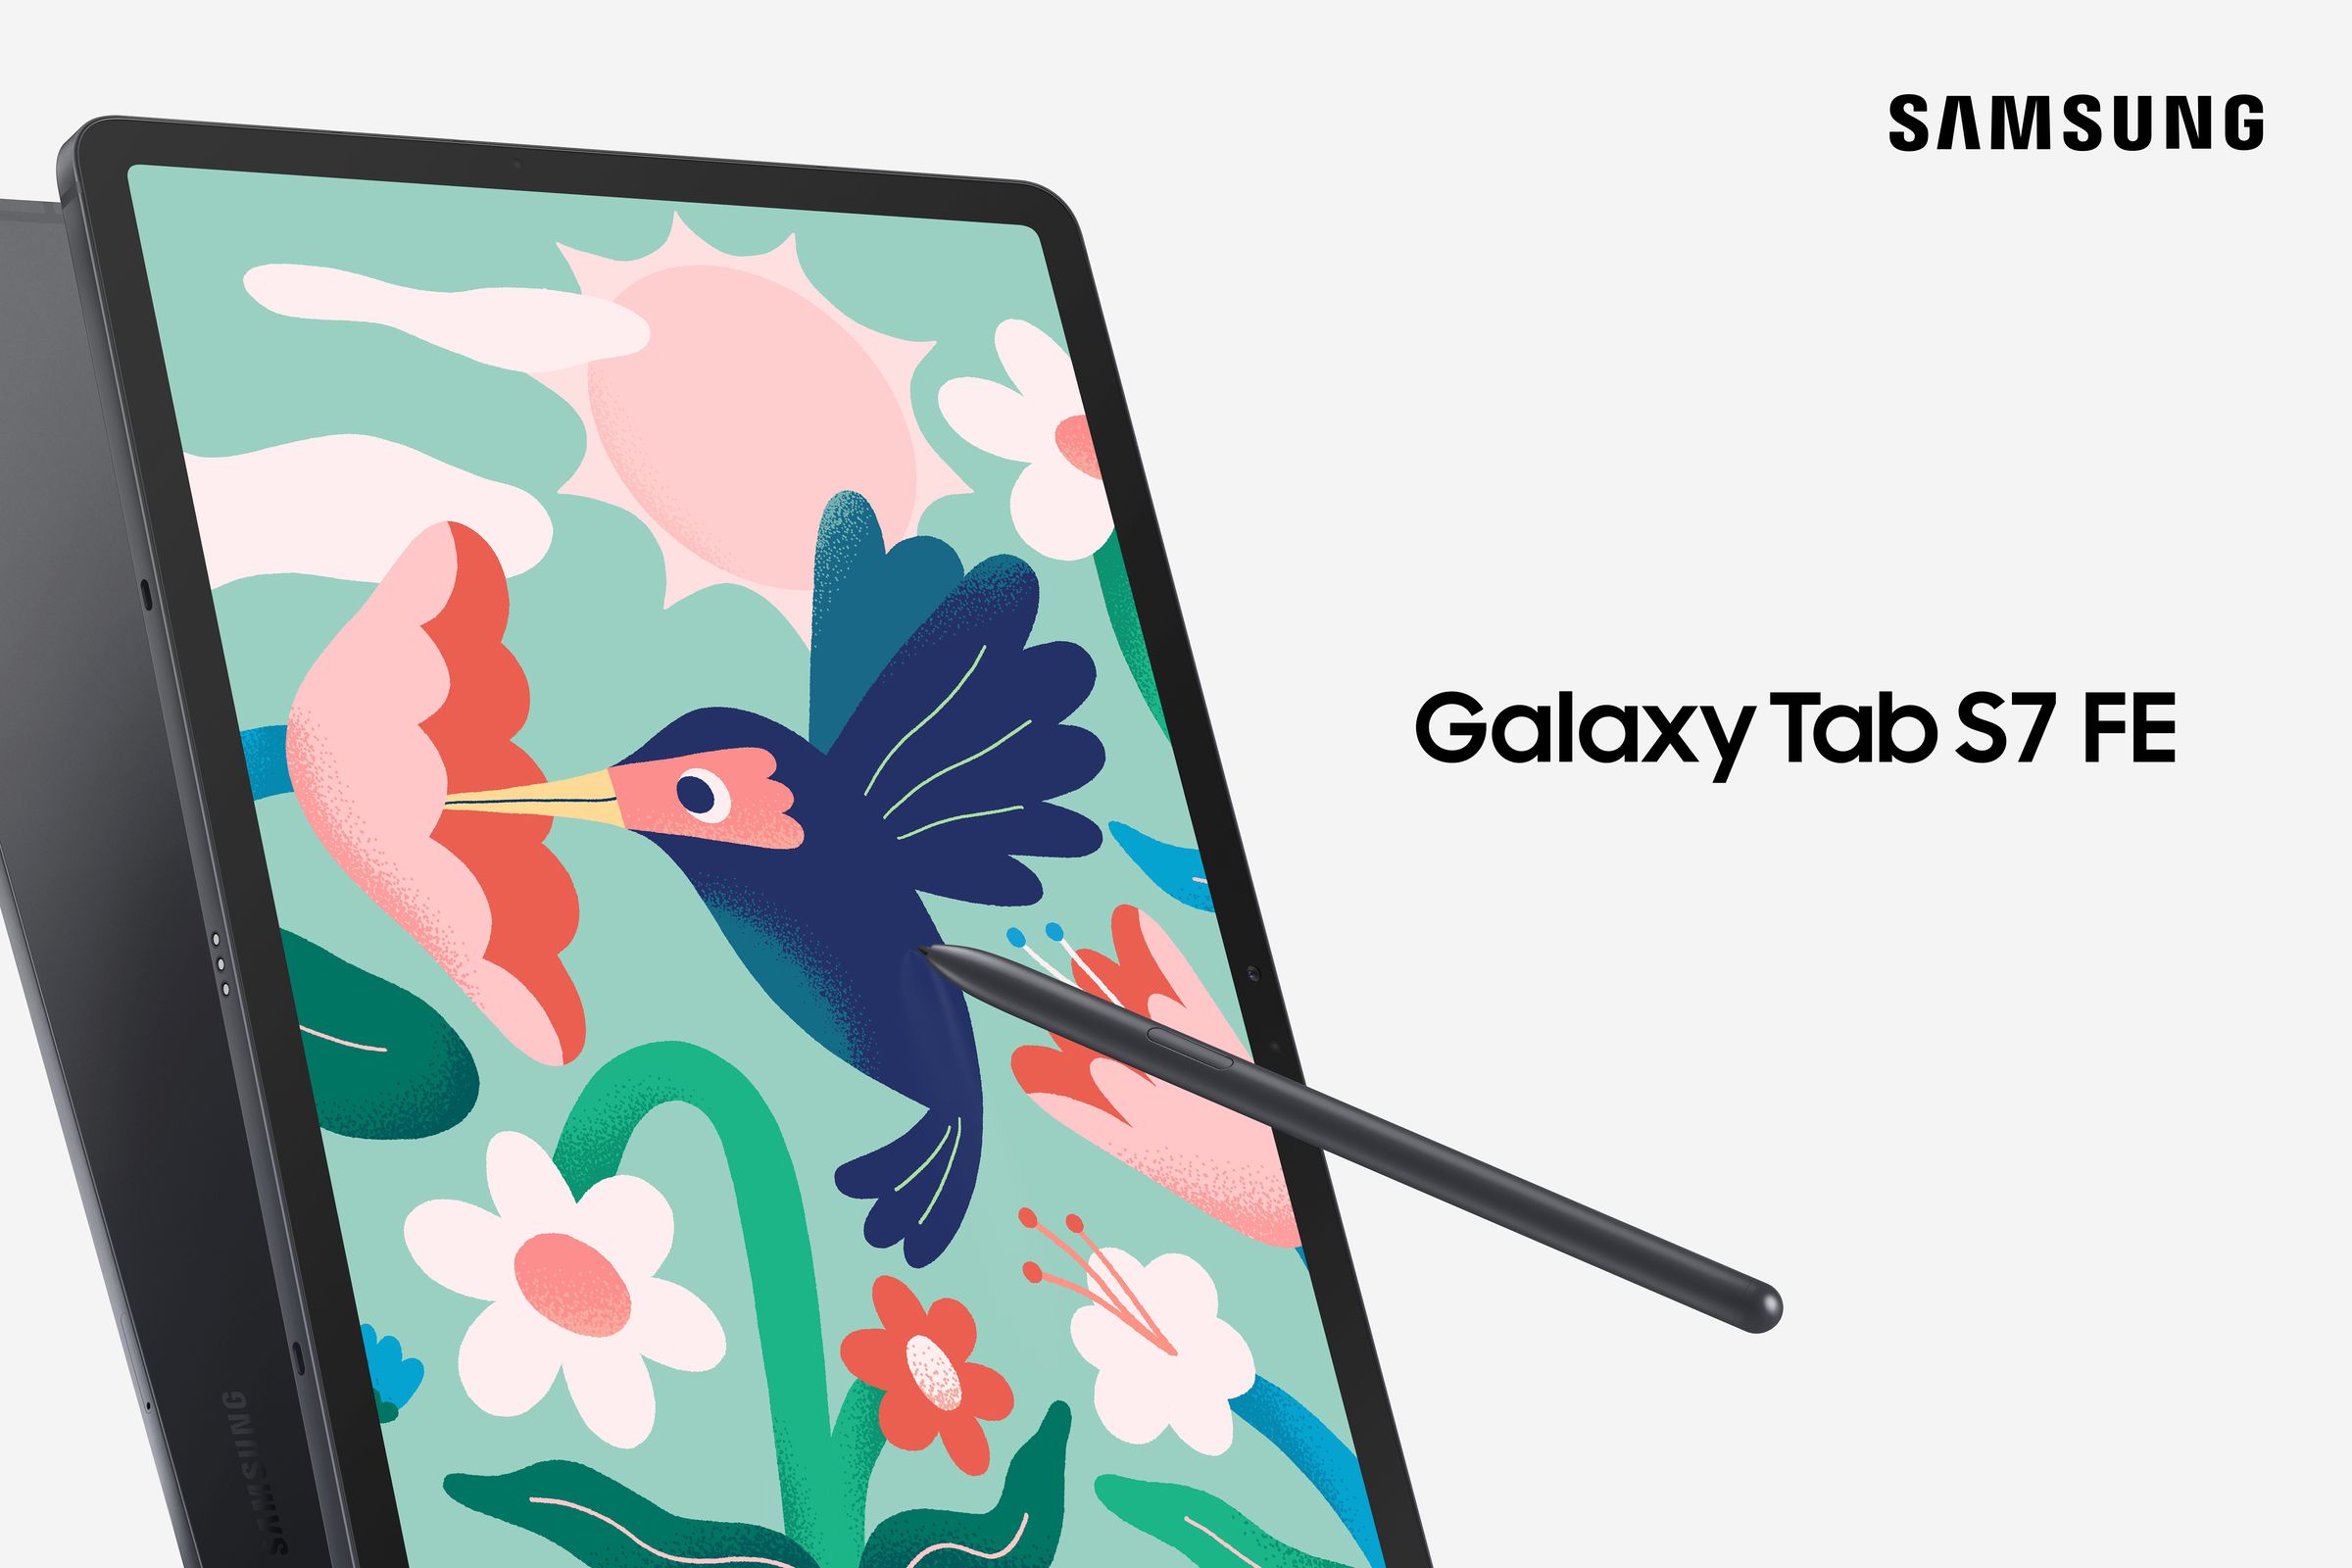 The Tab S7 FE comes with a stylus in the box.